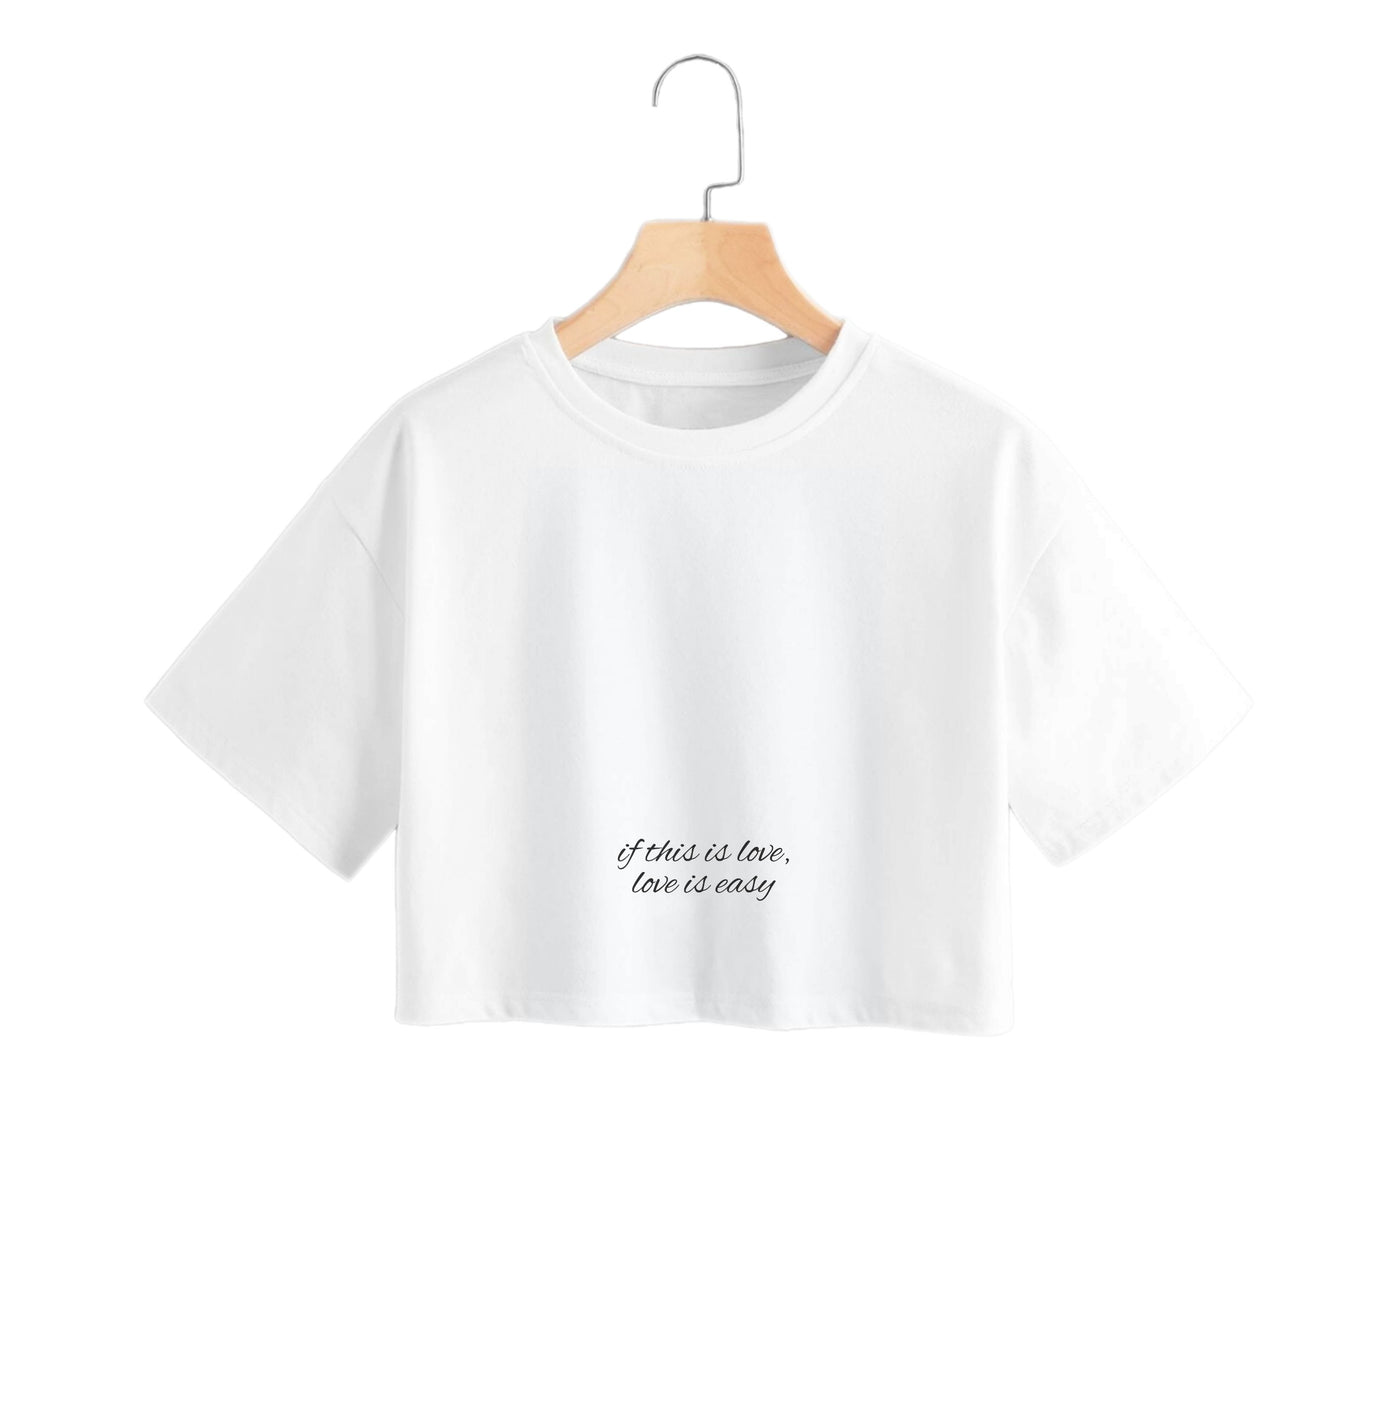 If This Is Love, Love Is Easy - McFly Crop Top